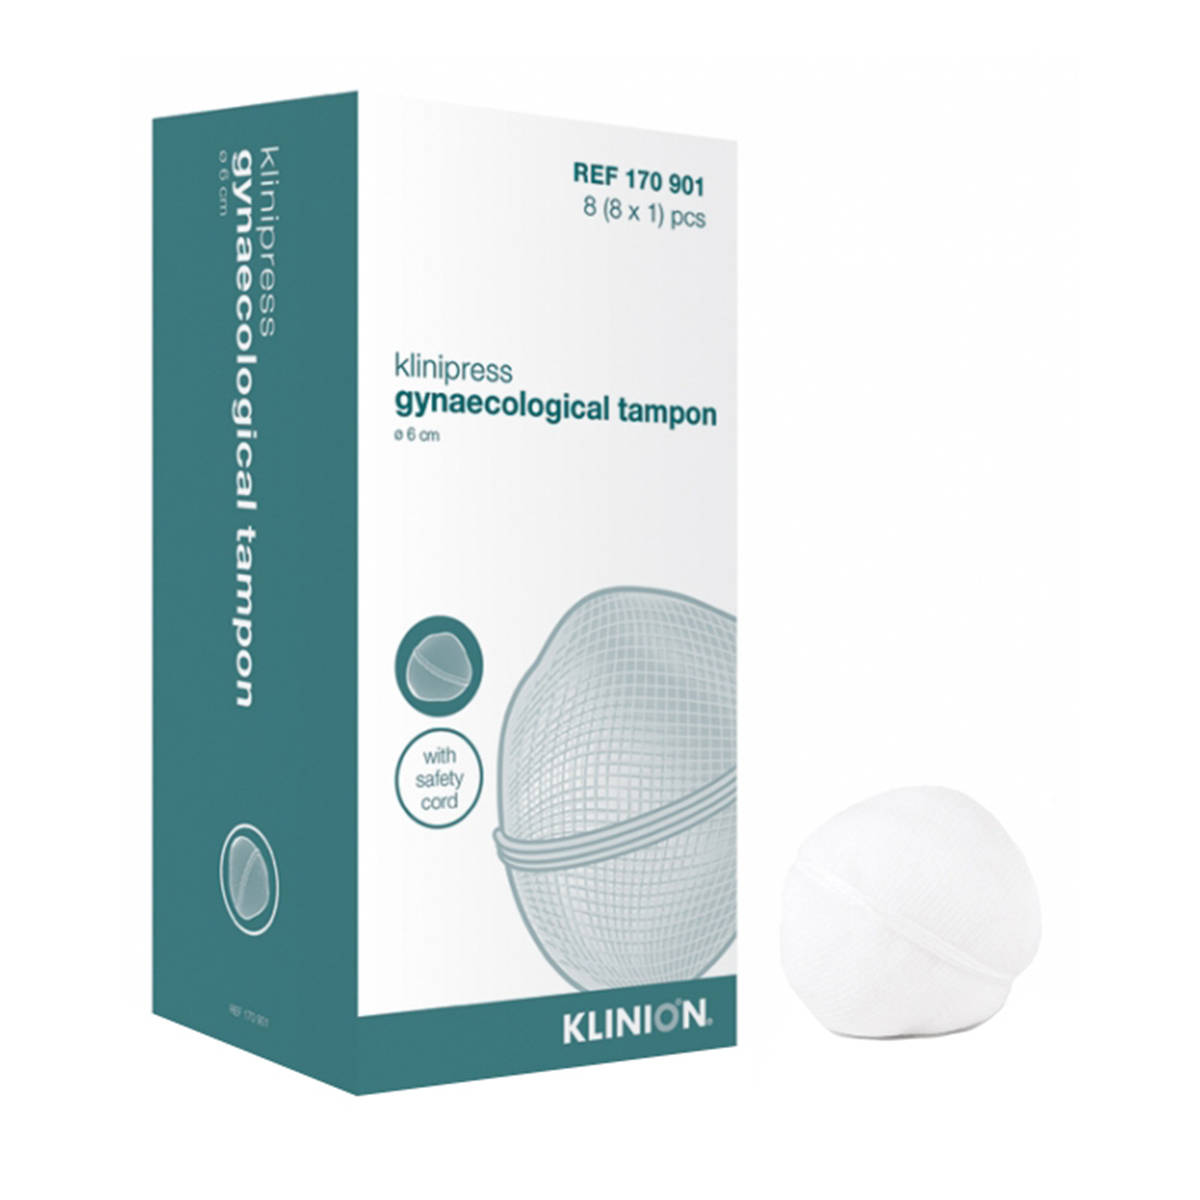 Gynaecological tampon with box